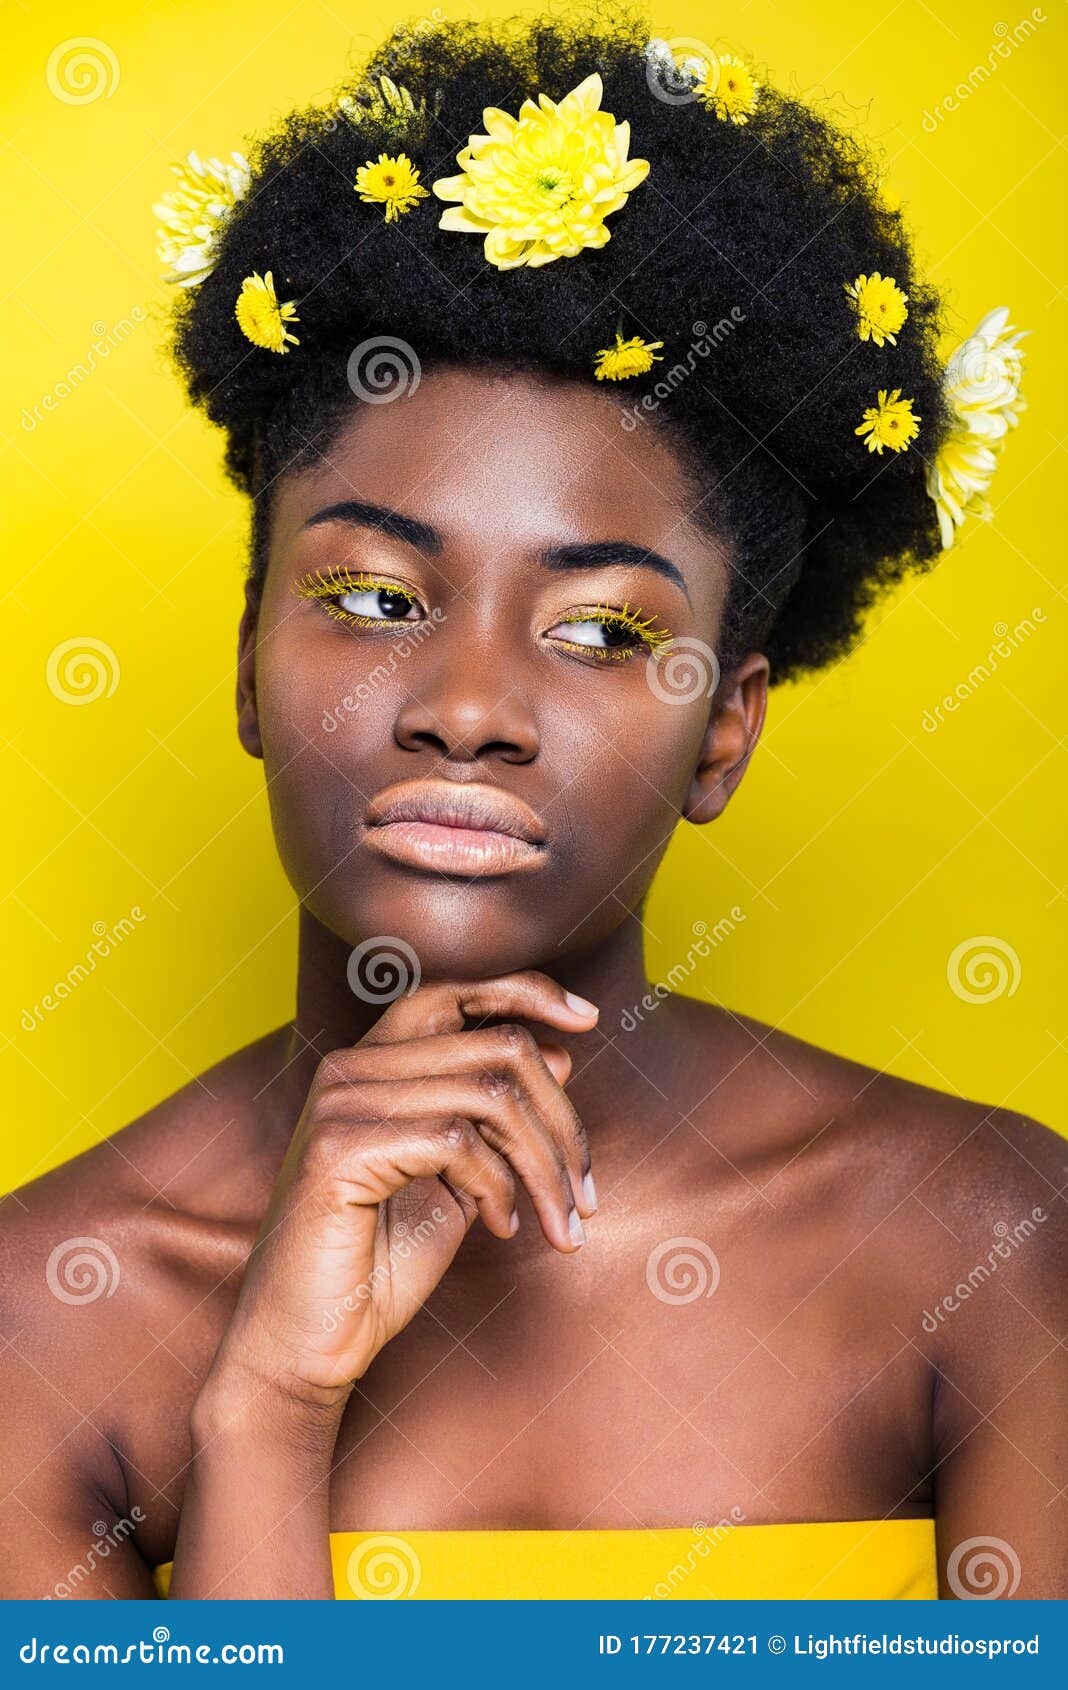 African American Girl With Flowers In Hair Looking Away On Yellow Stock Image Image Of